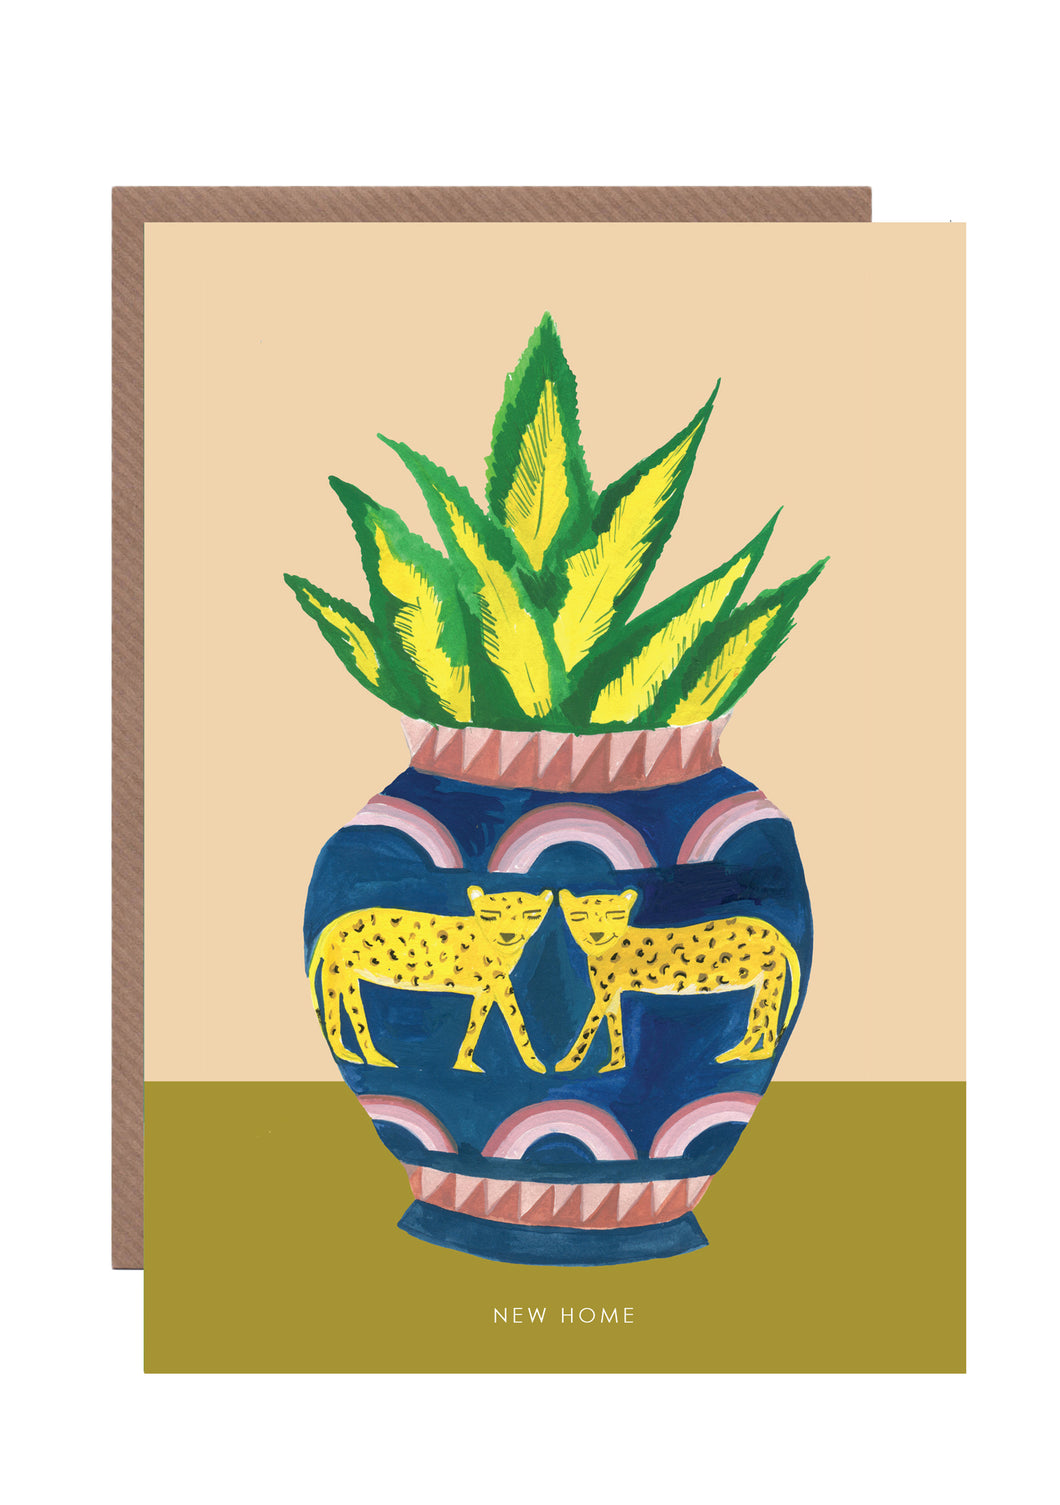 Leopard Plant Pot New Home greetings card